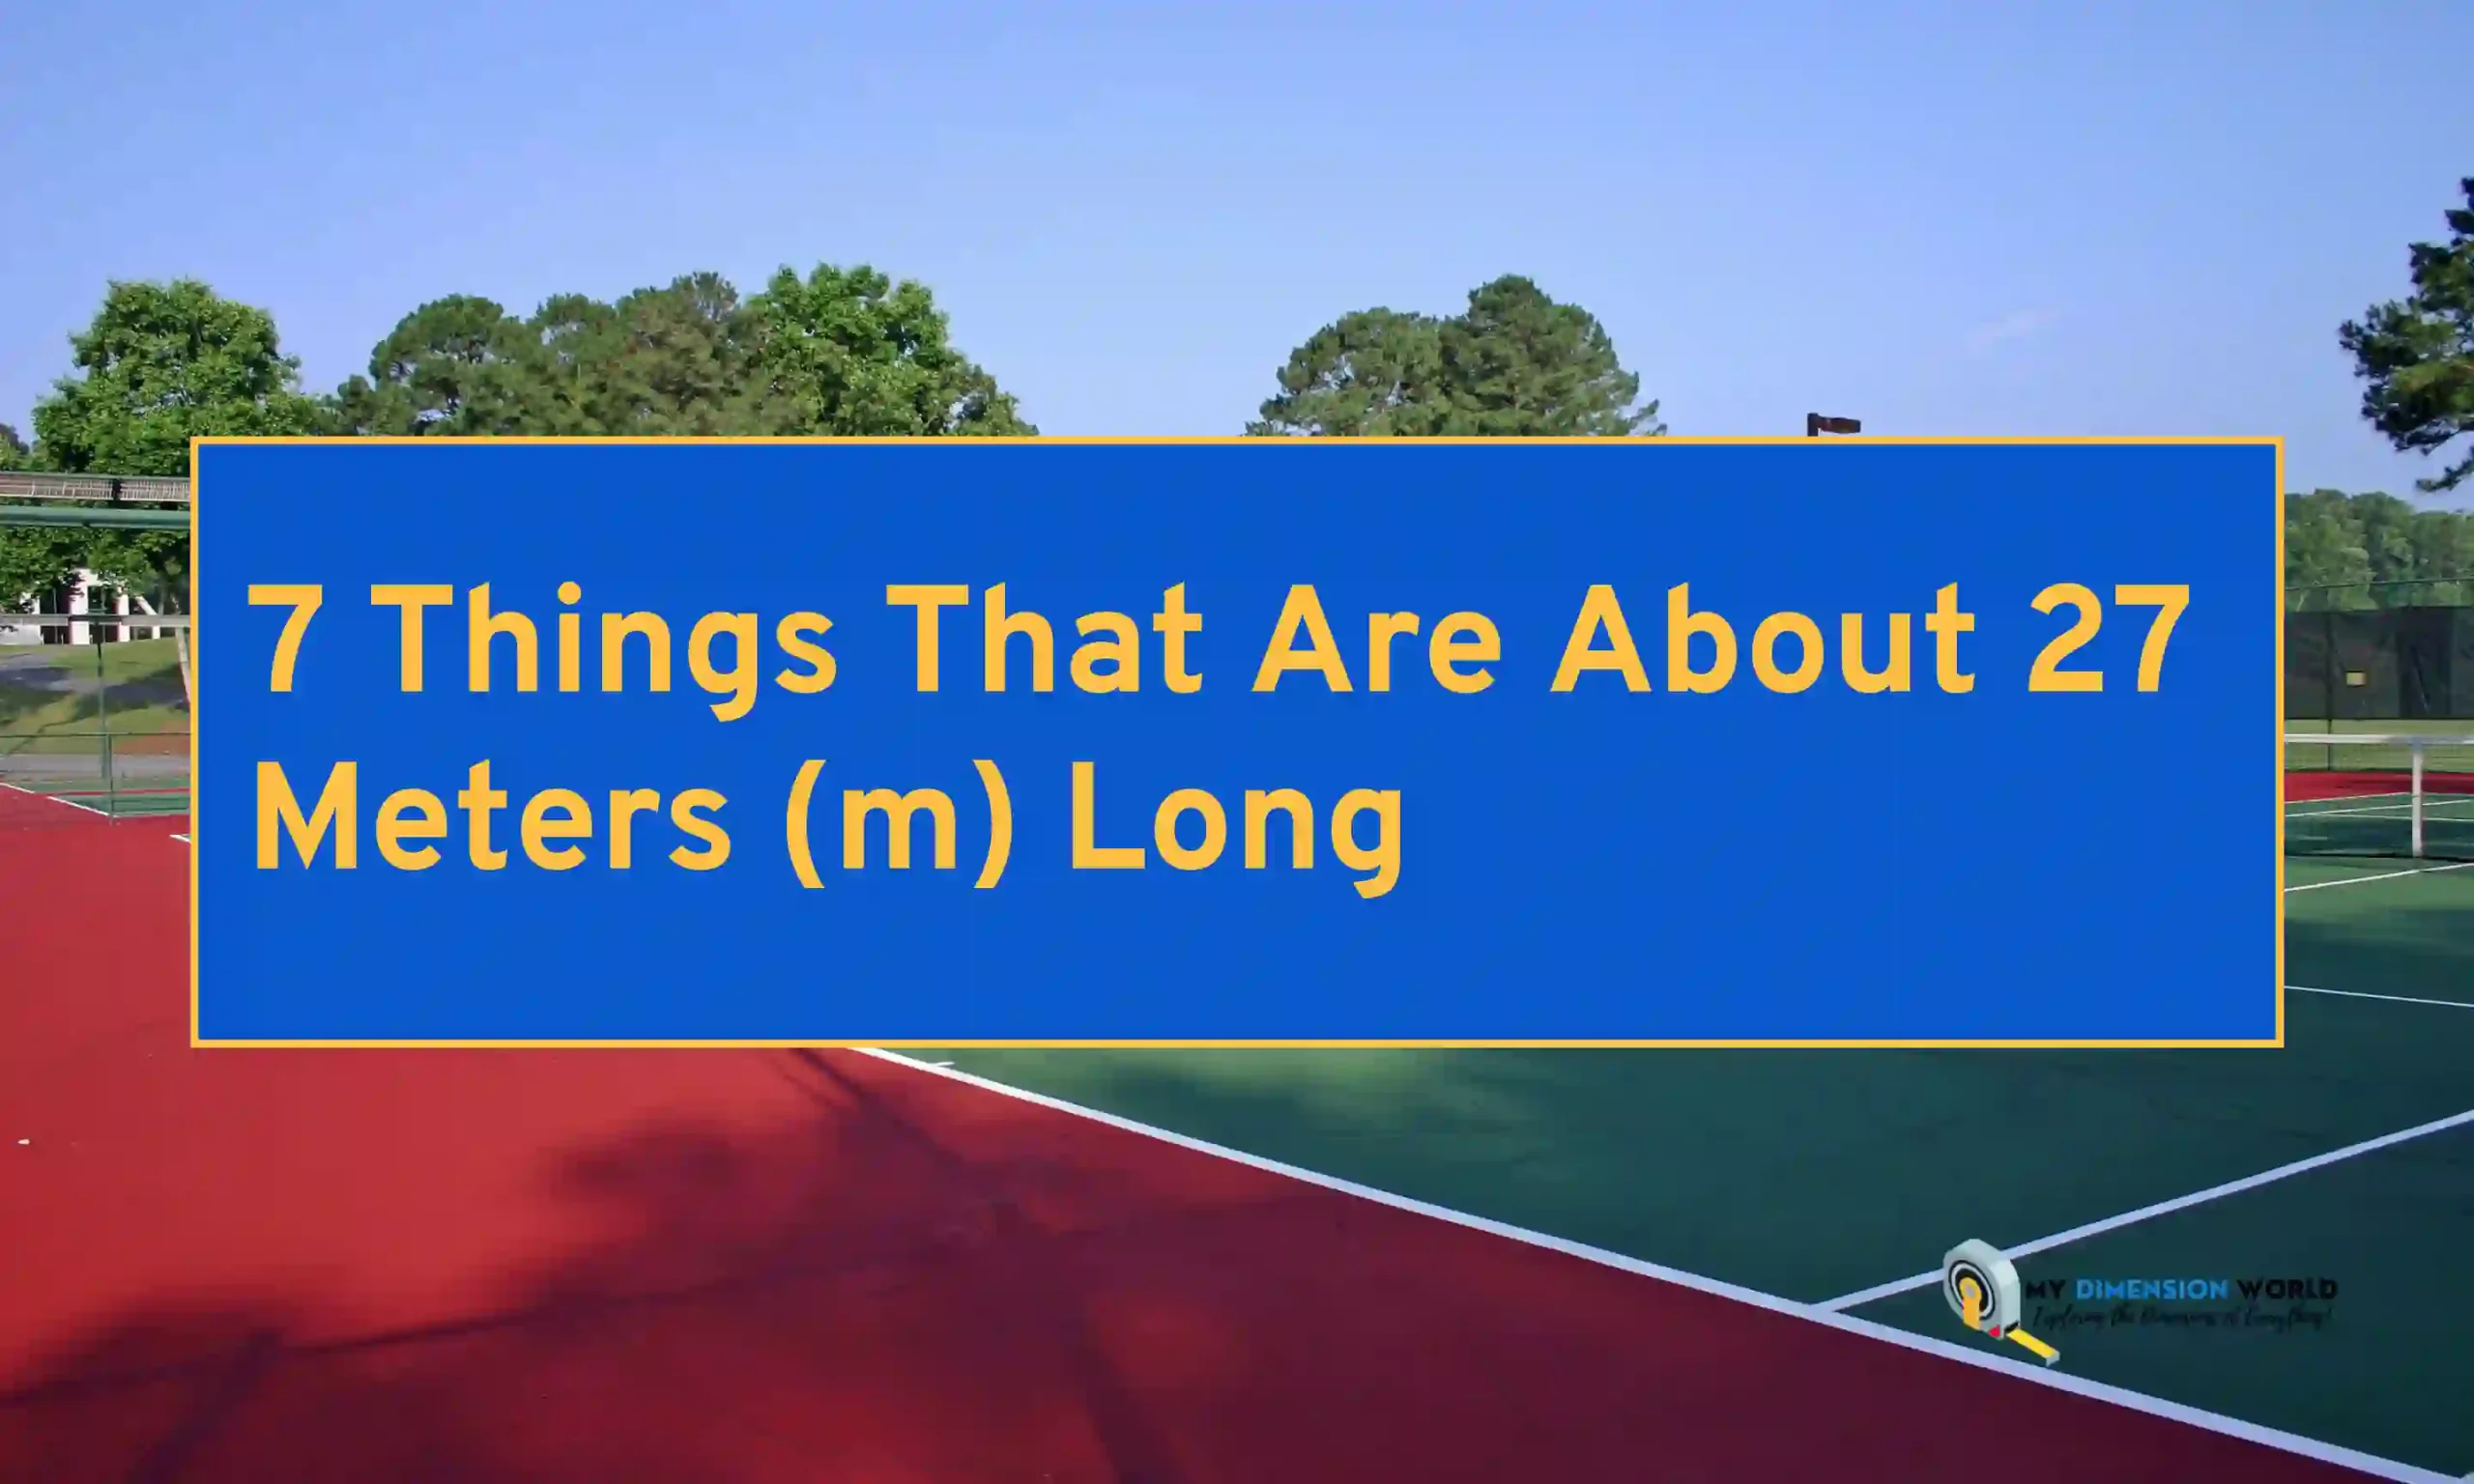 7 Things That Are About 27 Meters (m) Long